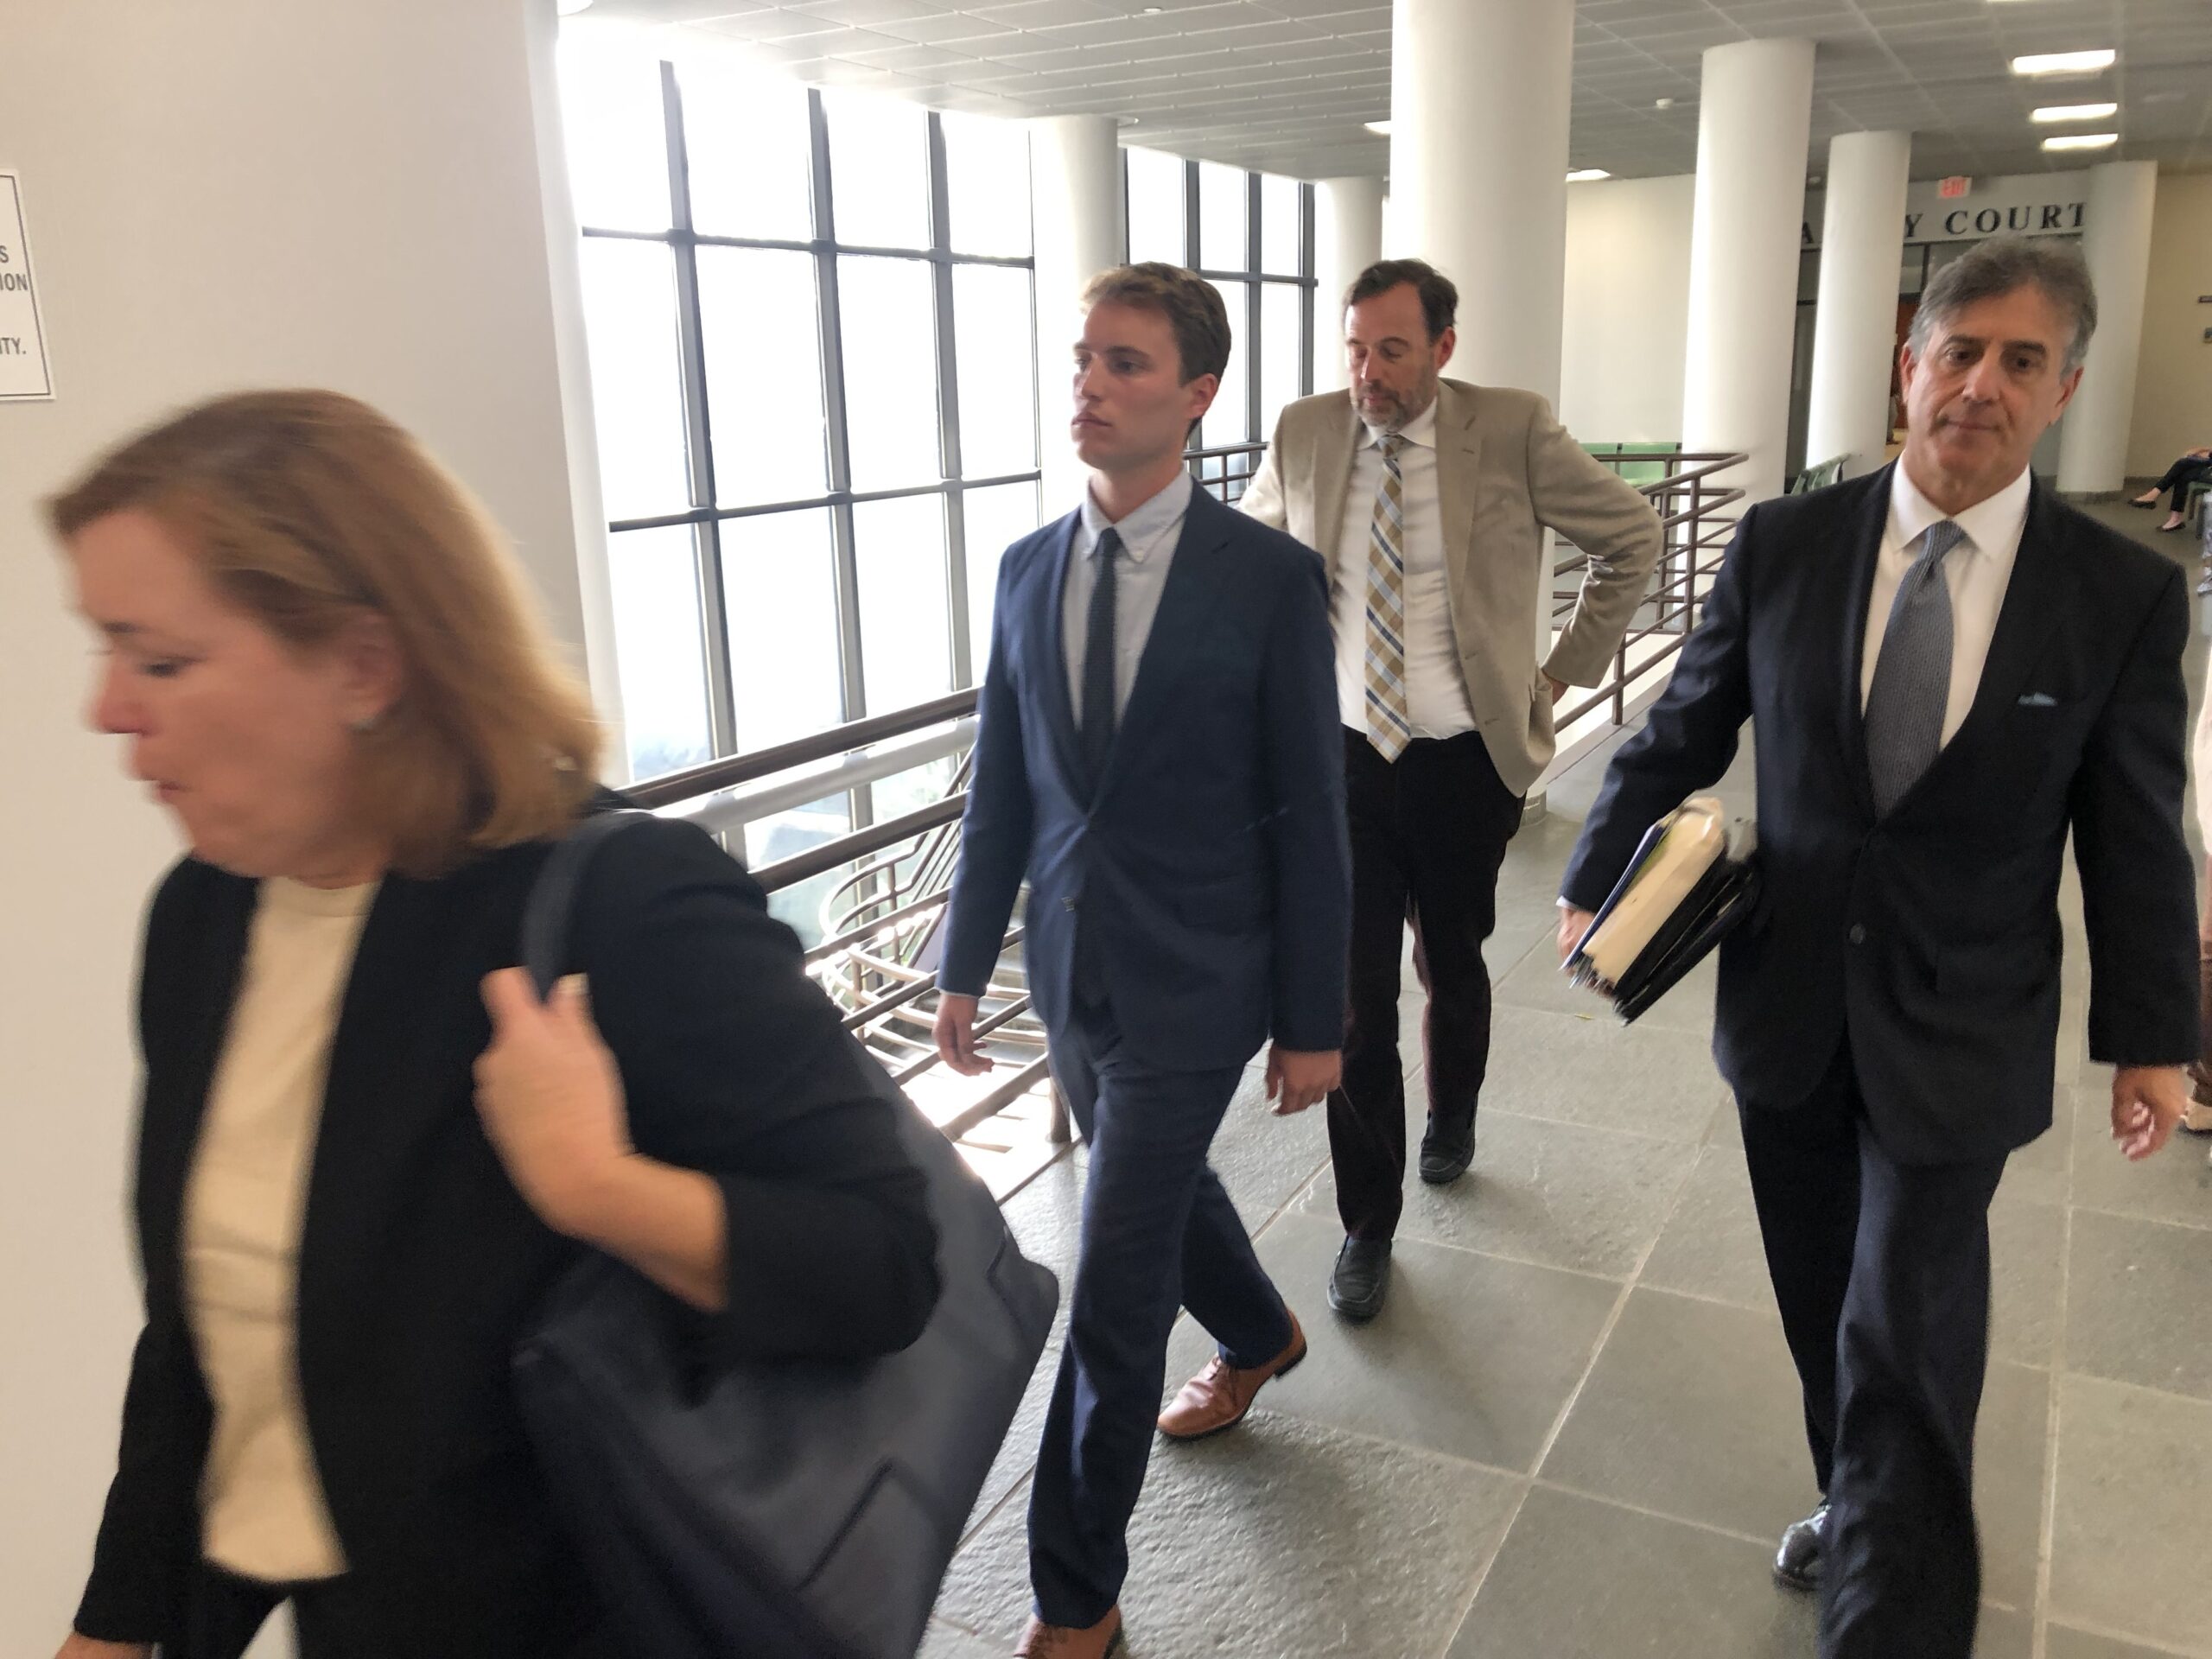 Daniel Campbell, second from left, after learning that he will serve 90 days in jail for fleeing the scene of a fatal accident in Amagansett last year. T.E. MCMORROW